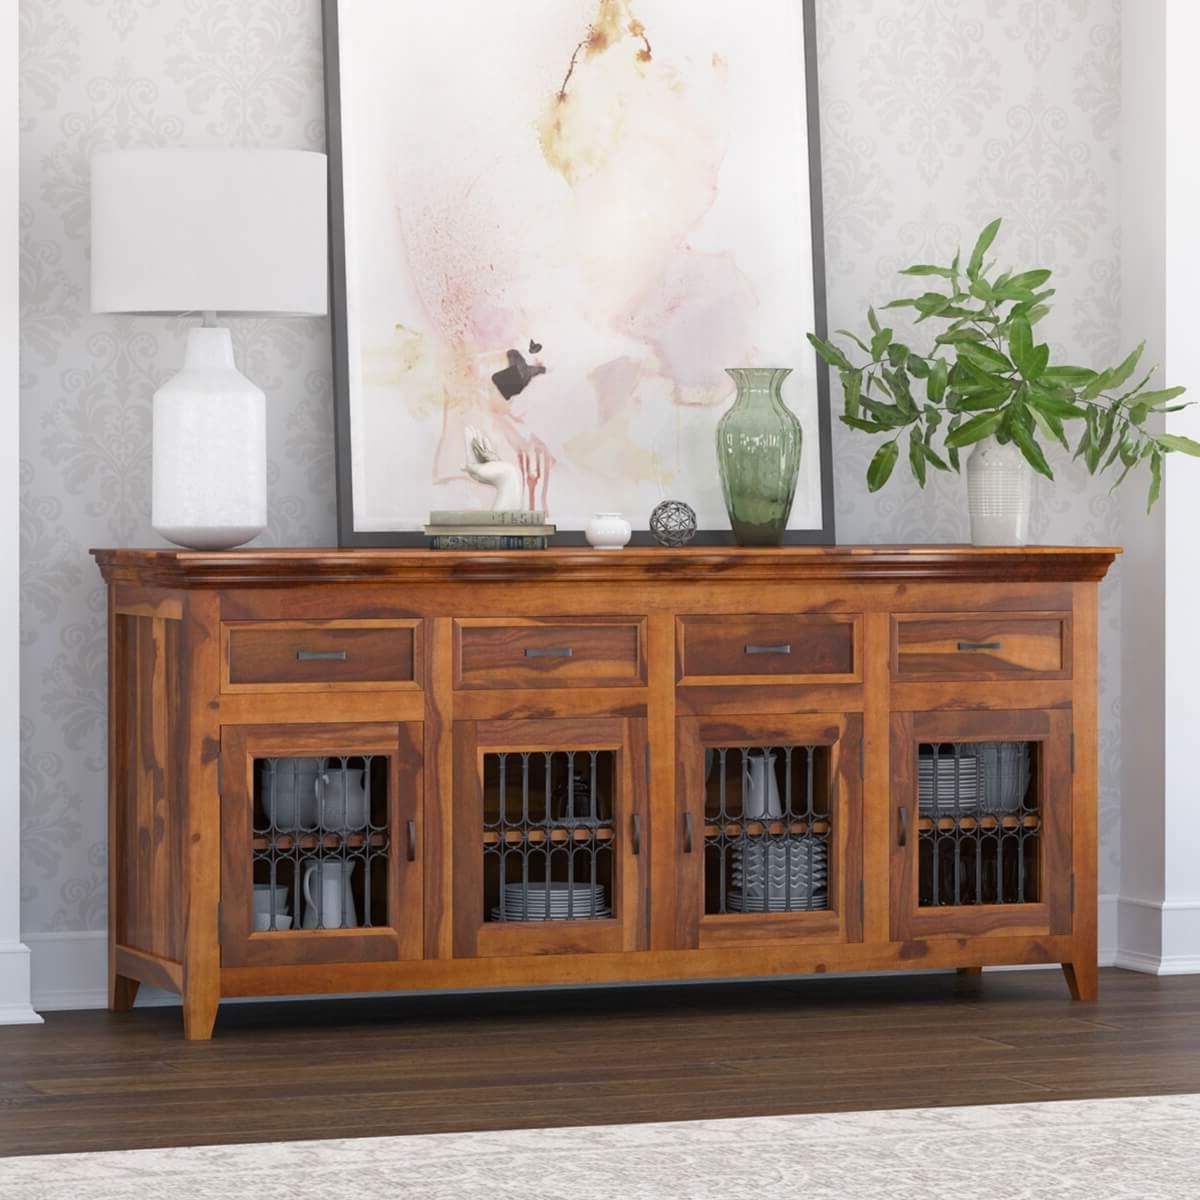 [%solid Wood Buffets And Sideboards Clearance, Save 51%. Within Newest Solid Wood Buffet Sideboards|solid Wood Buffet Sideboards With Regard To Widely Used Solid Wood Buffets And Sideboards Clearance, Save 51%.|recent Solid Wood Buffet Sideboards Regarding Solid Wood Buffets And Sideboards Clearance, Save 51%.|preferred Solid Wood Buffets And Sideboards Clearance, Save 51% (View 7 of 15)